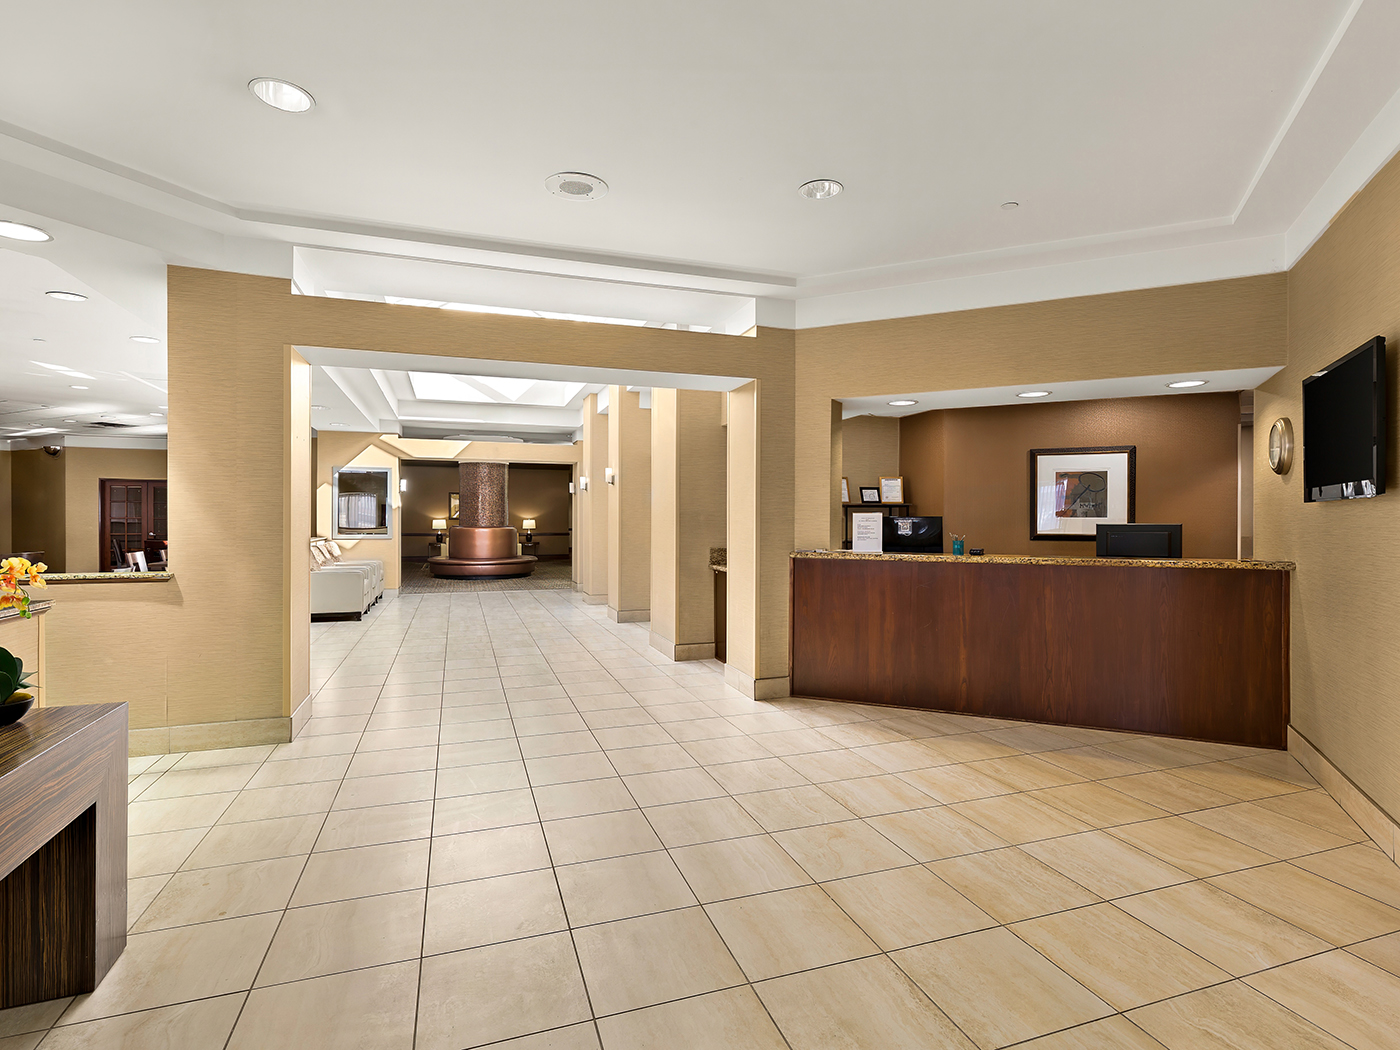 The lobby and front desk at Hotel RL Cleveland Airport West.